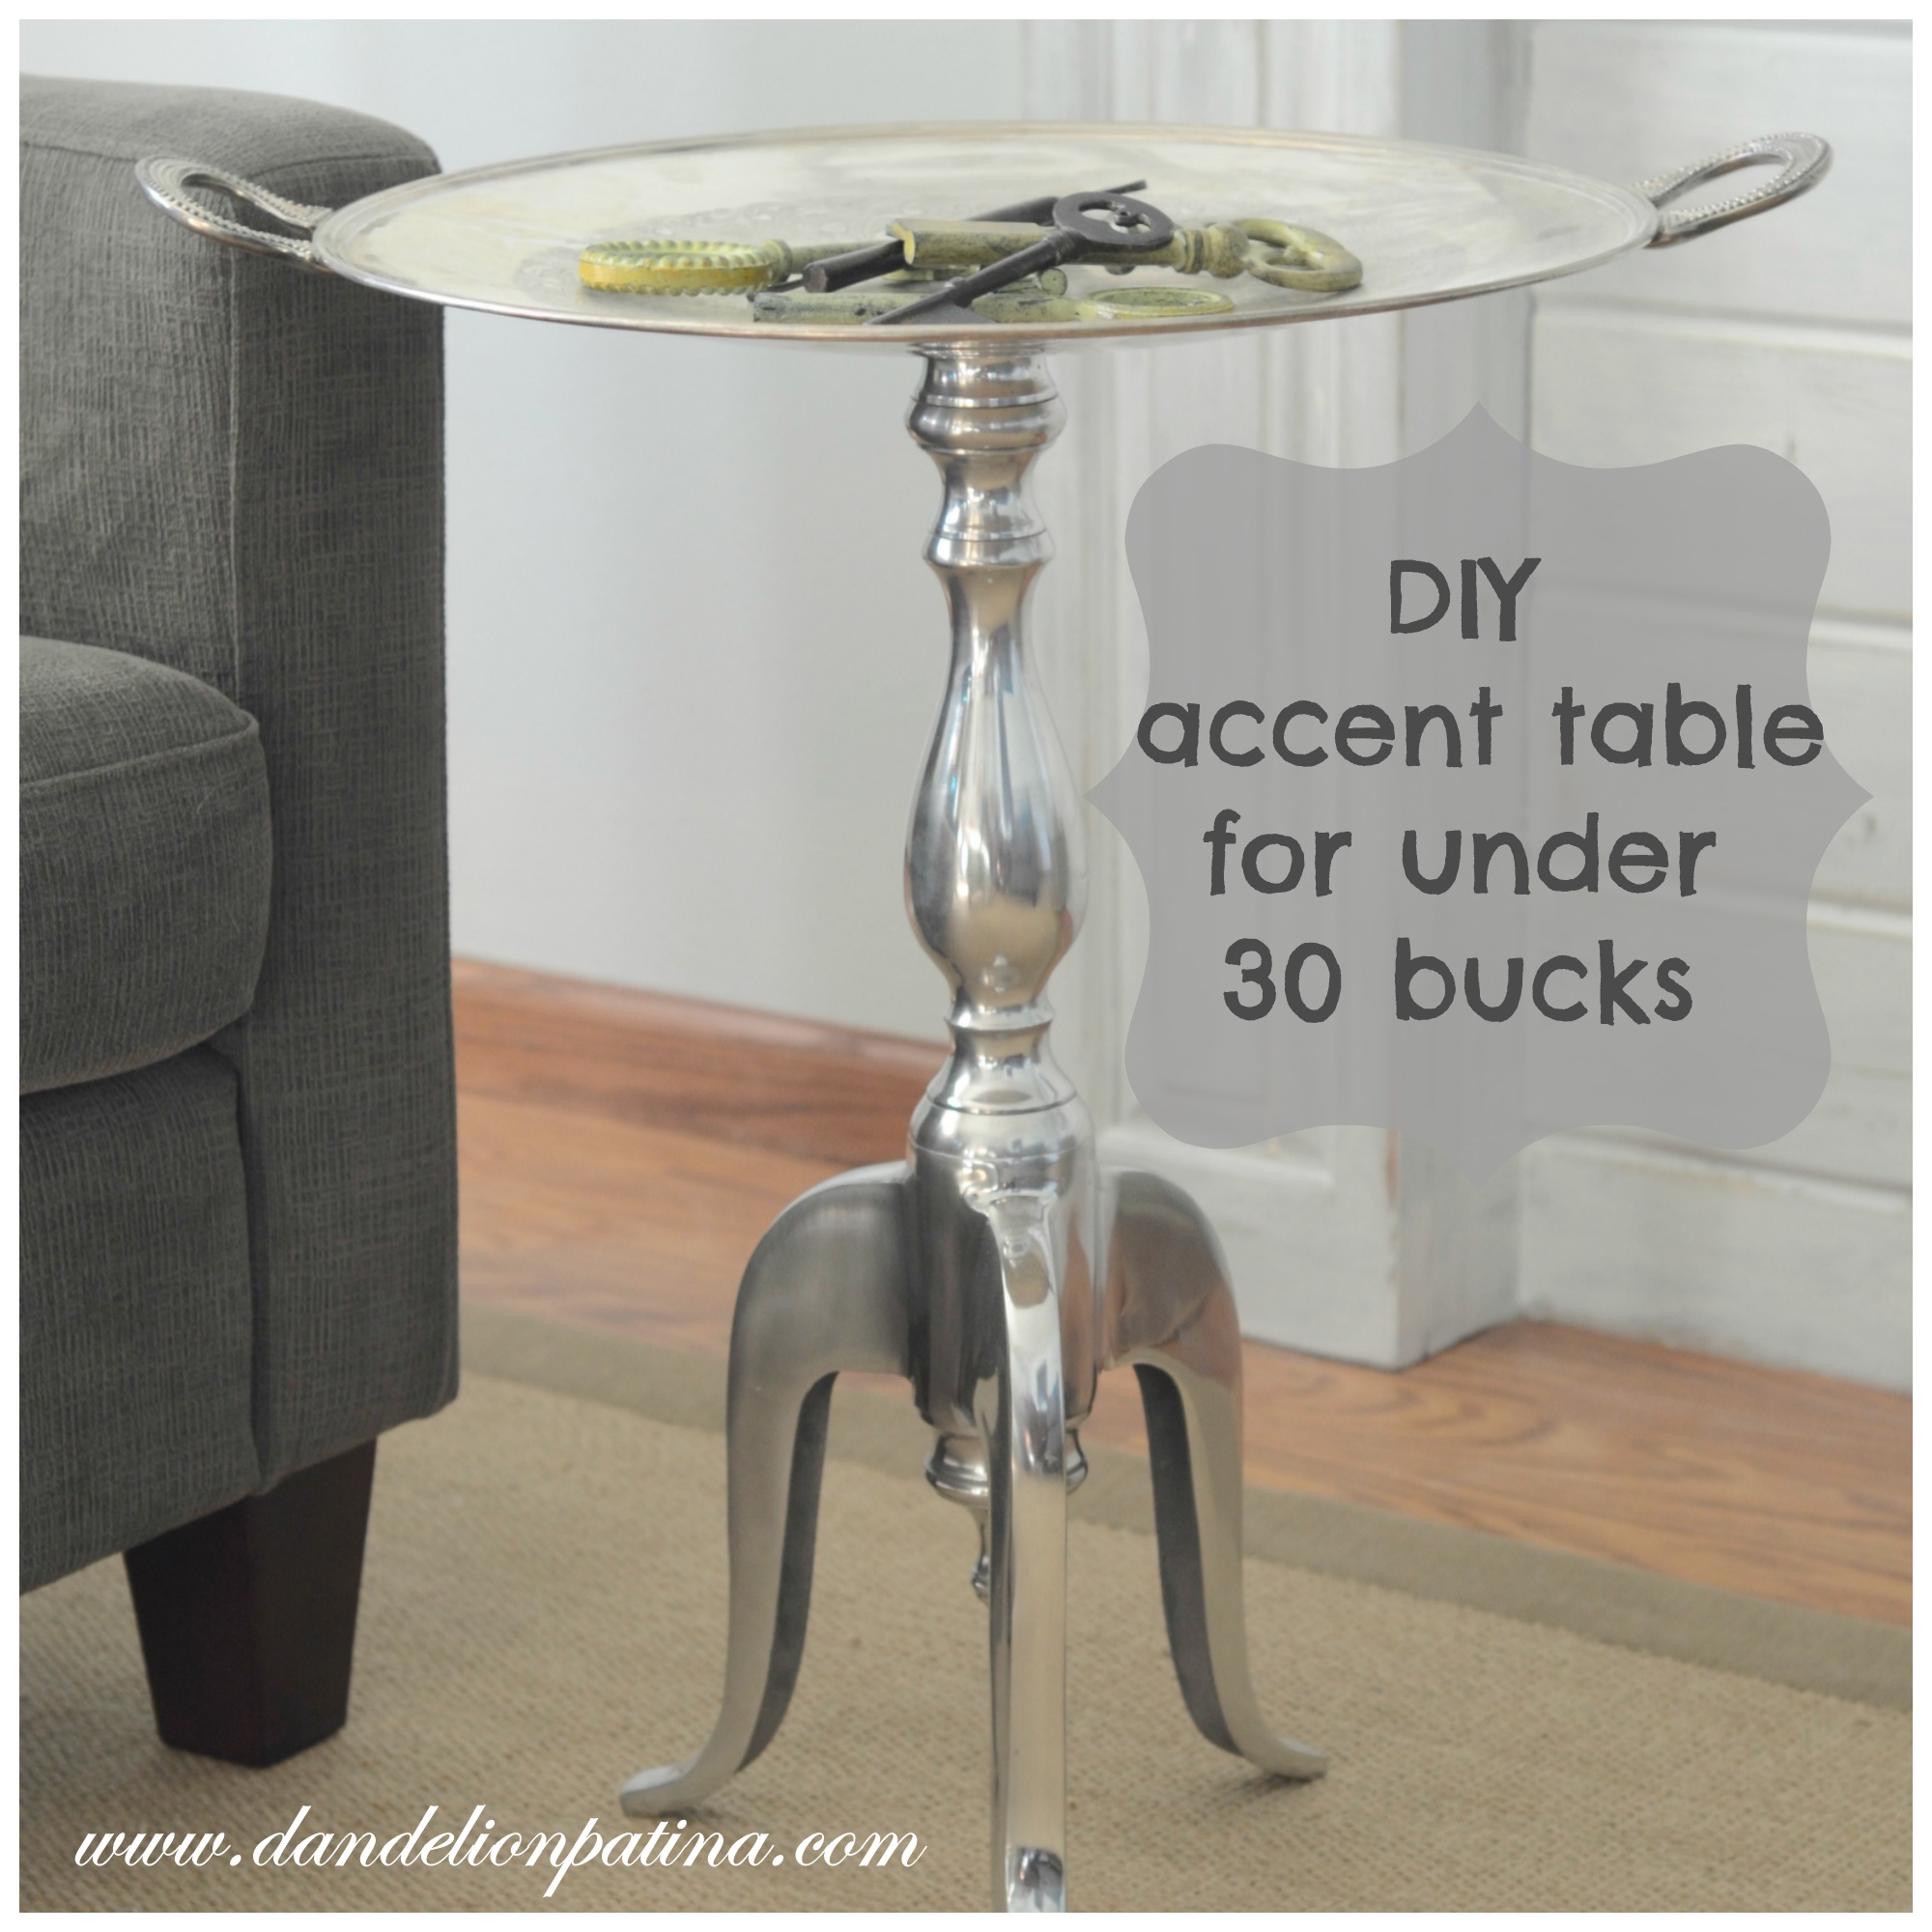 diy project dandelion patina accent table bucks home goods tables metal small black lamp end with usb port mid century modern corner multi colored side mini tiffany lamps formal